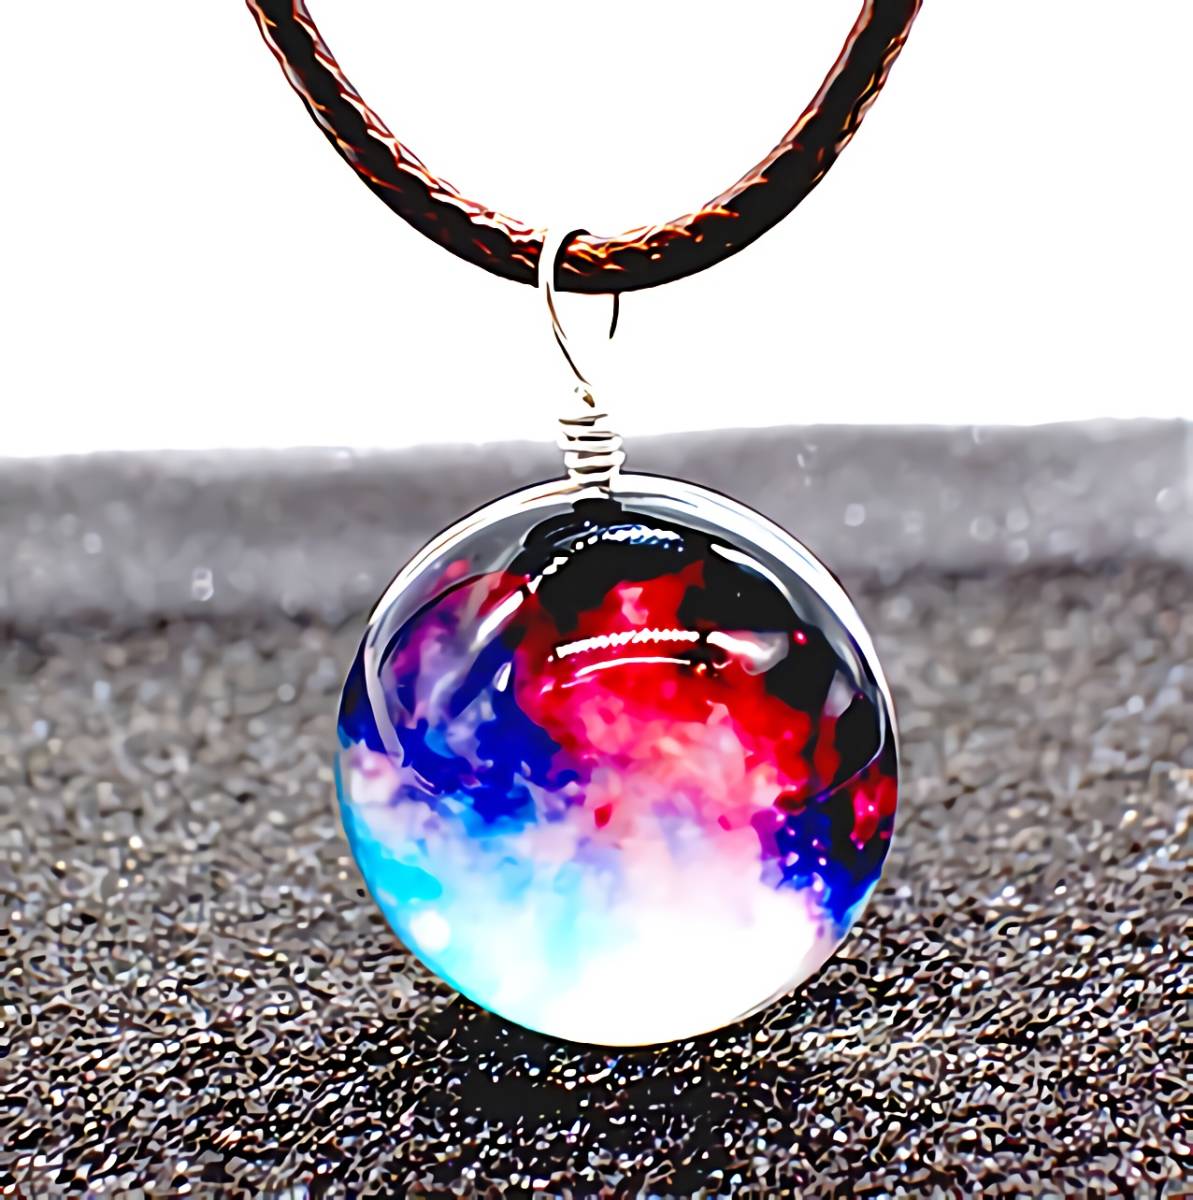  new goods 1 jpy ~* free shipping * cosmos. heaven lamp Milky Way Galaxy red flair sphere silver necklace birthday present travel consecutive holidays summer festival gift domestic sending 